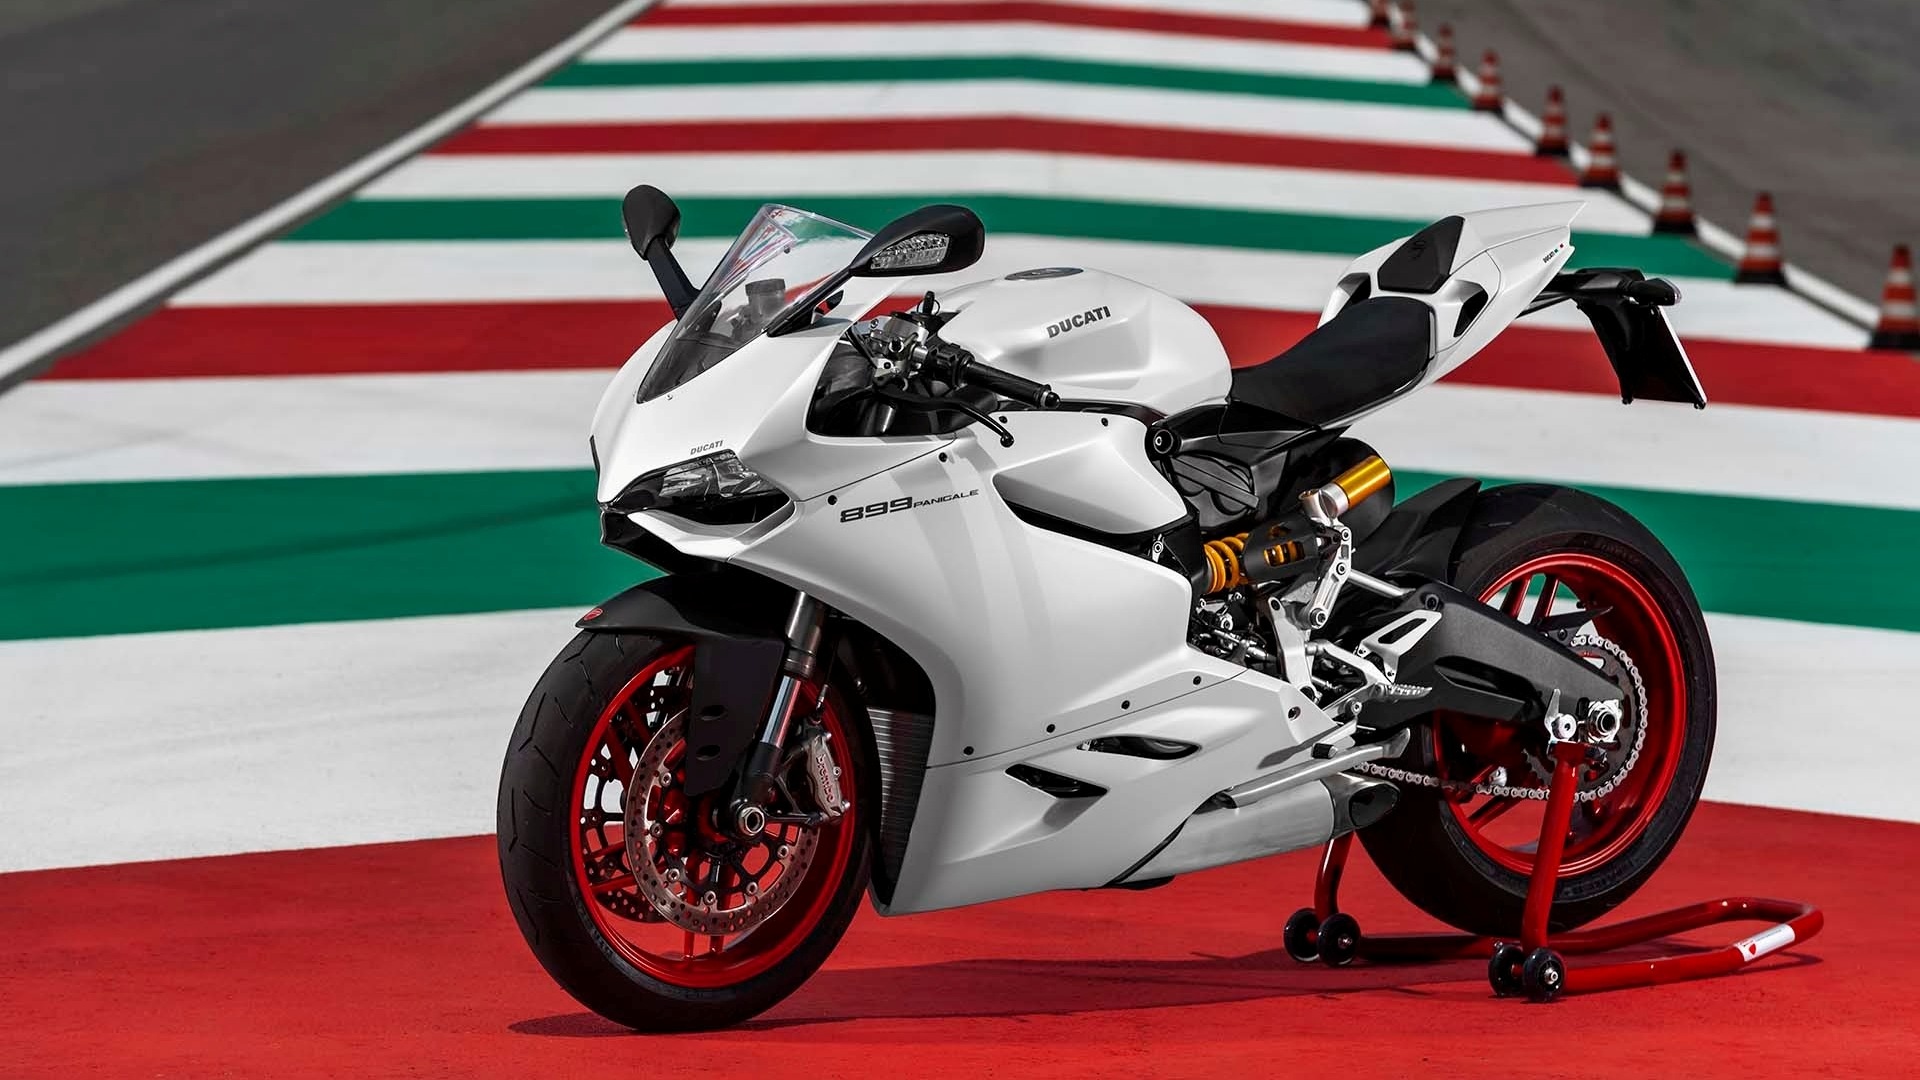 Ducati Superbike 899 Panigale 2014 Wallpapers   1920x1080   455202 1920x1080